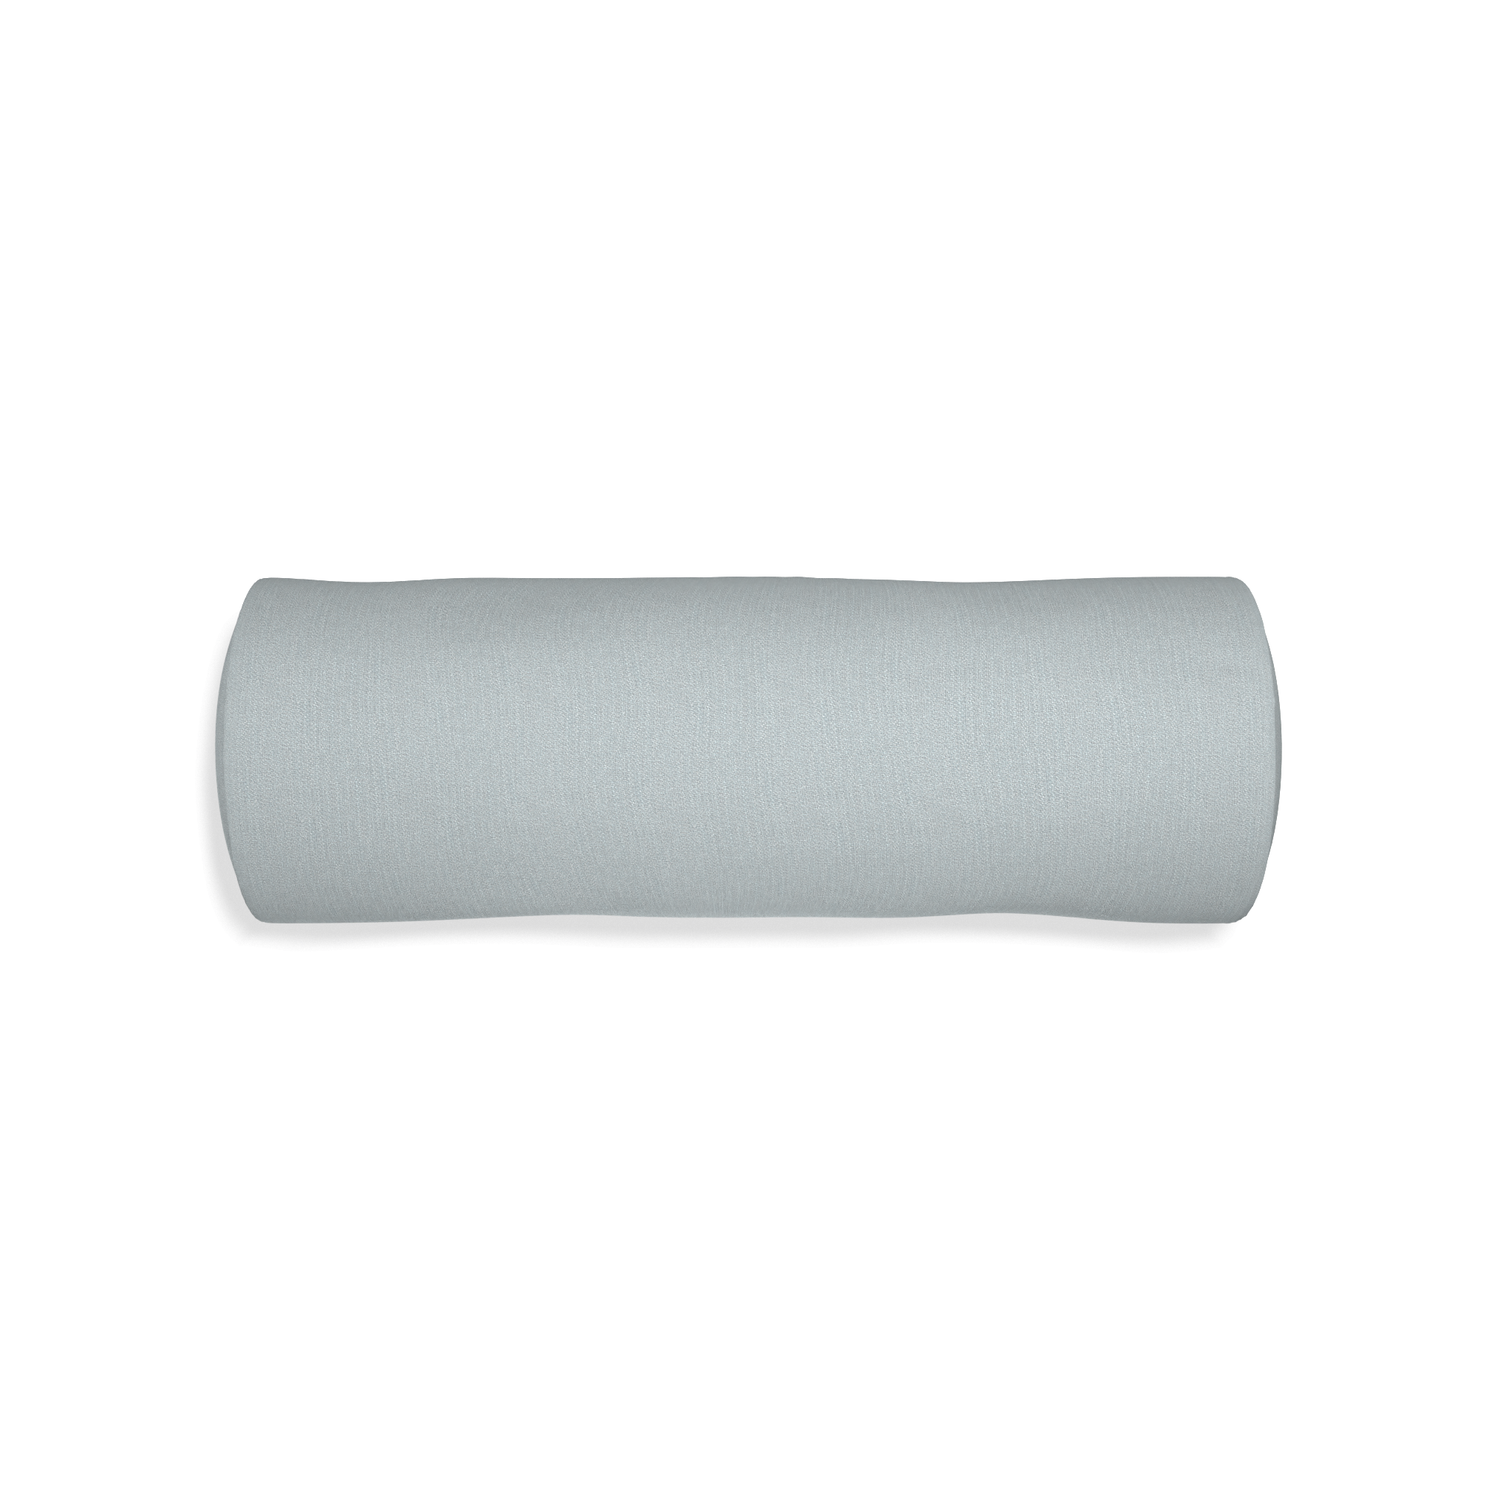 Bolster sea custom grey bluepillow with none on white background